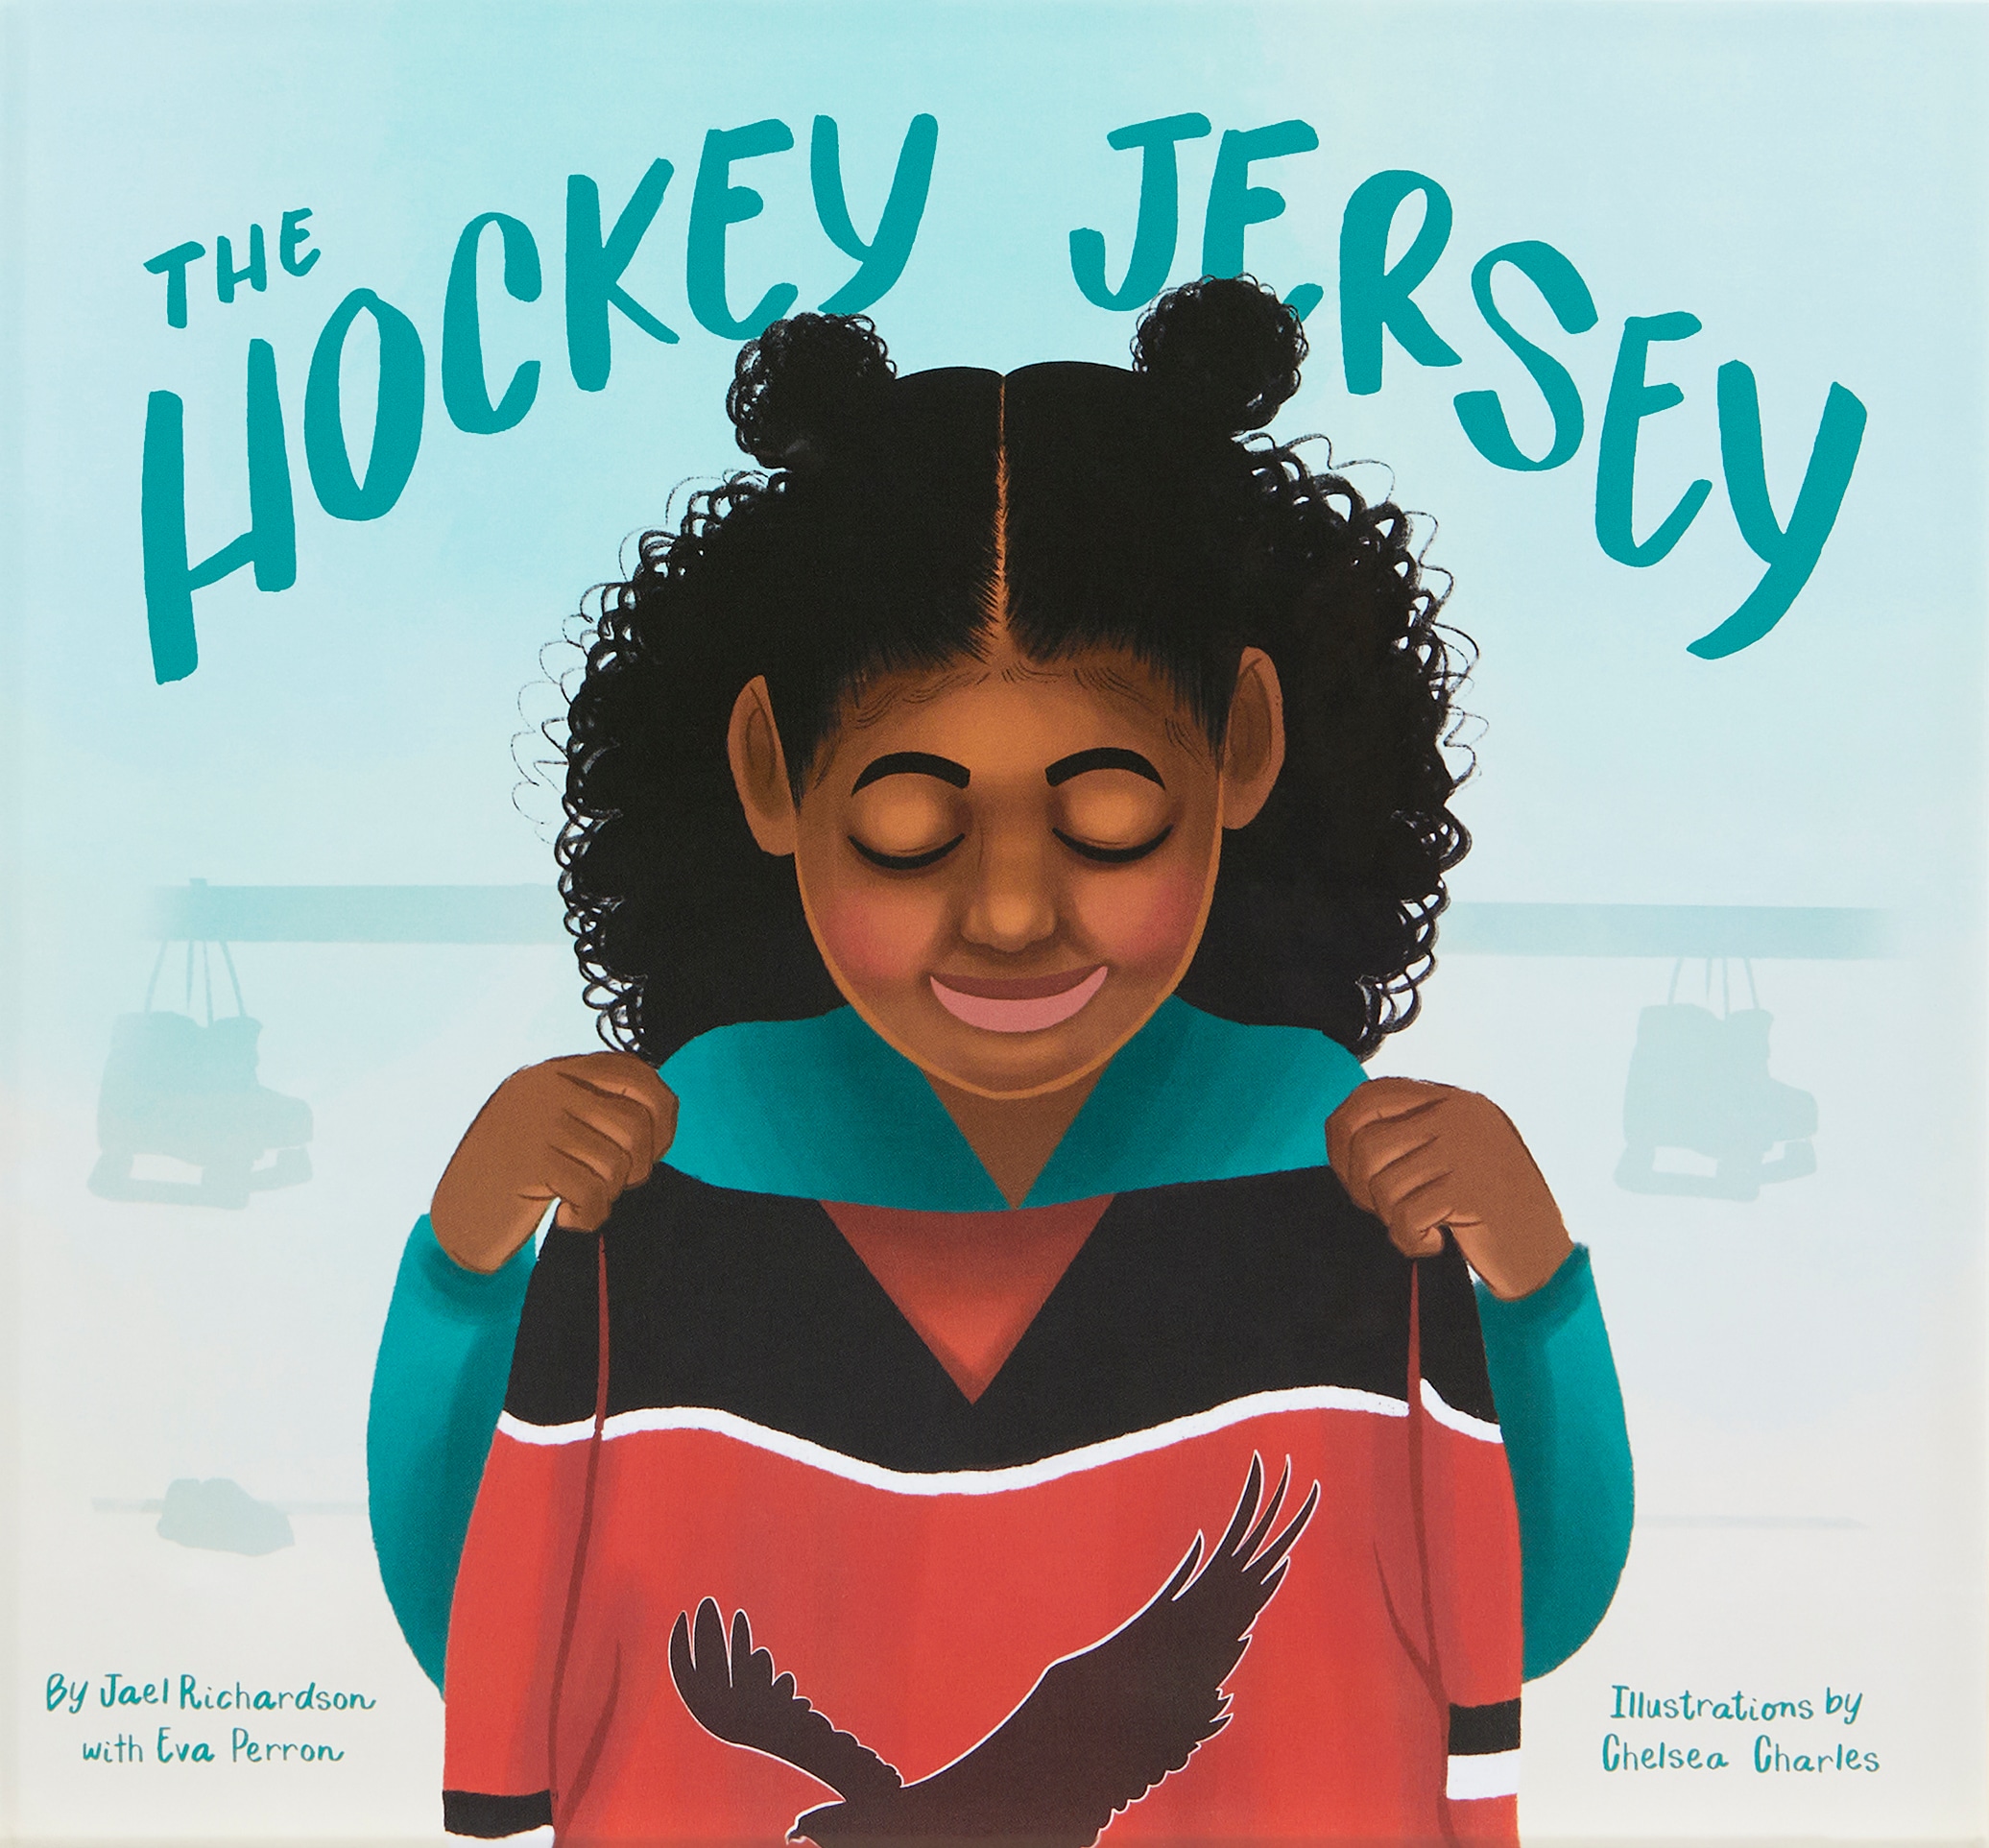 The Hockey Jersey Handbook: A Guide to Collecting and Caring For